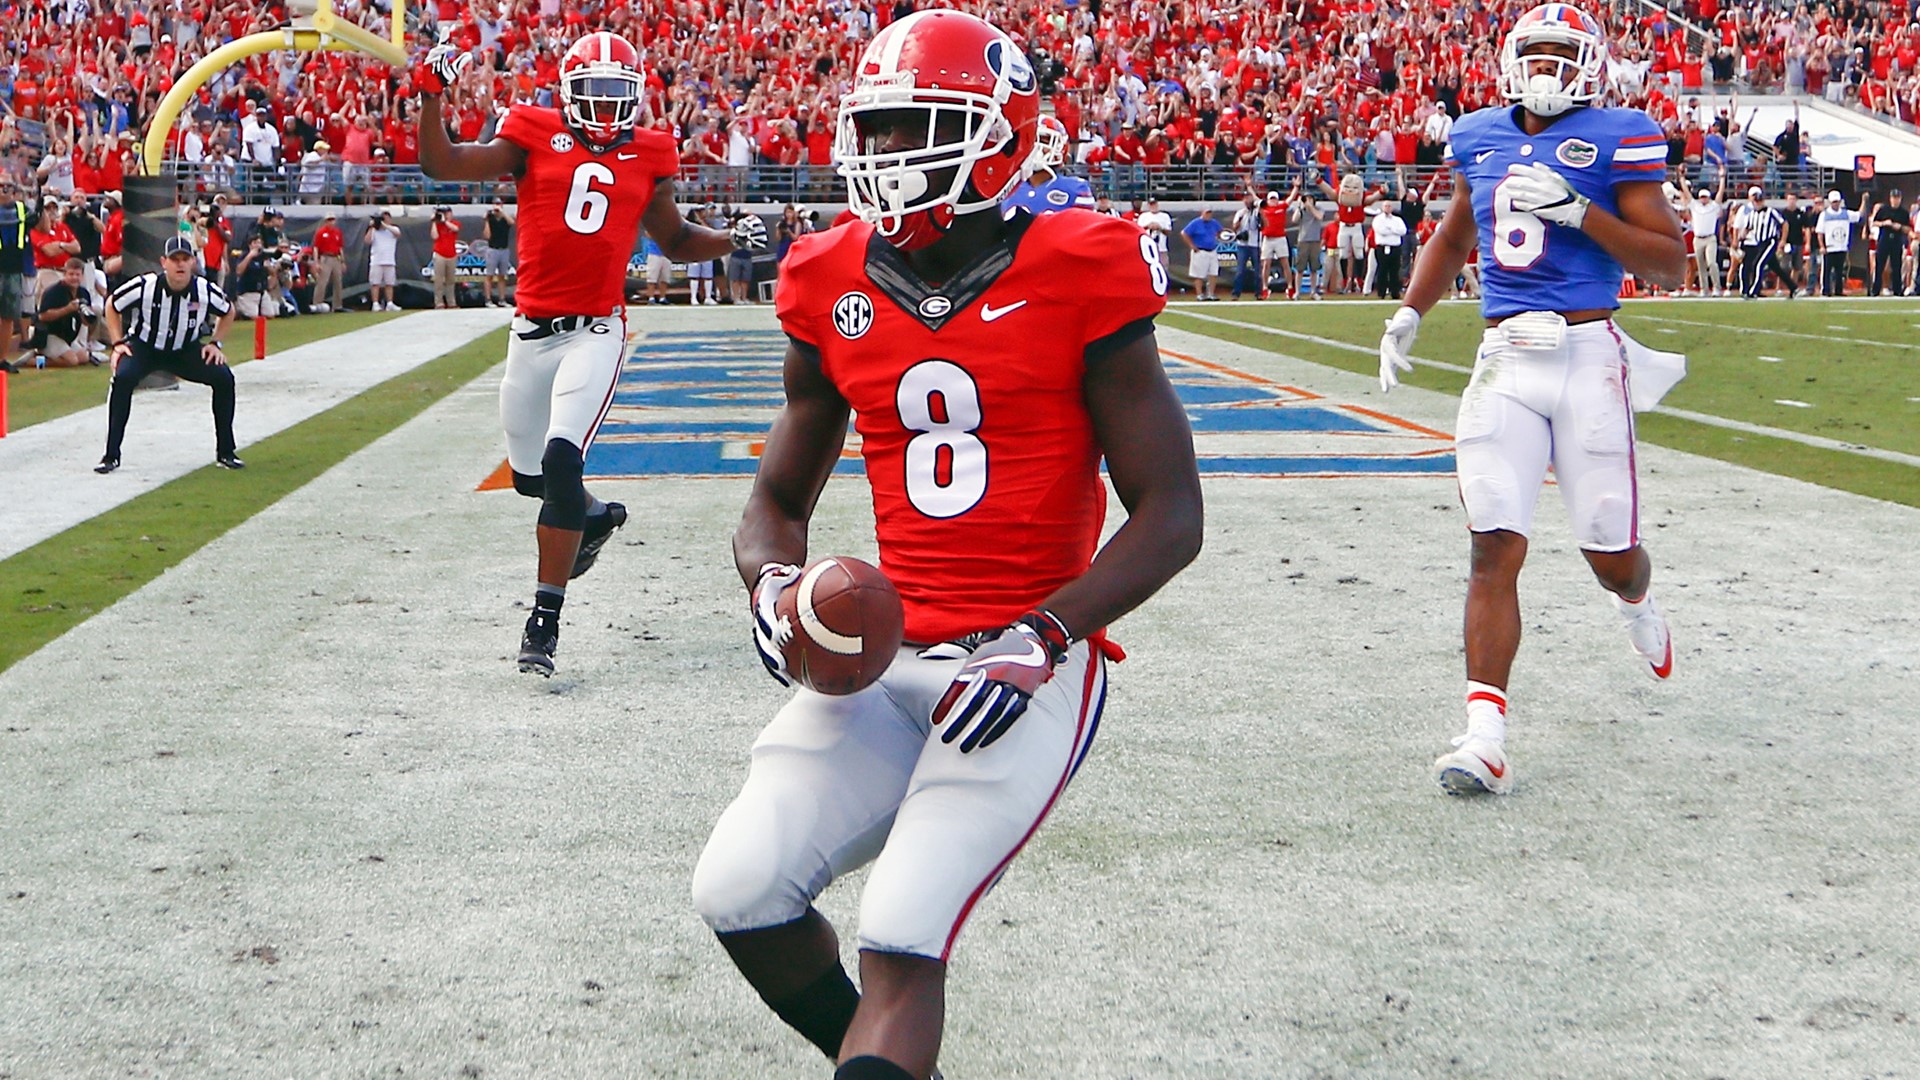 Of his final 16 games with UGA, dating back to the 2017 campaign, Ridley (13 career TDs) found the end zone at least once nine different times.